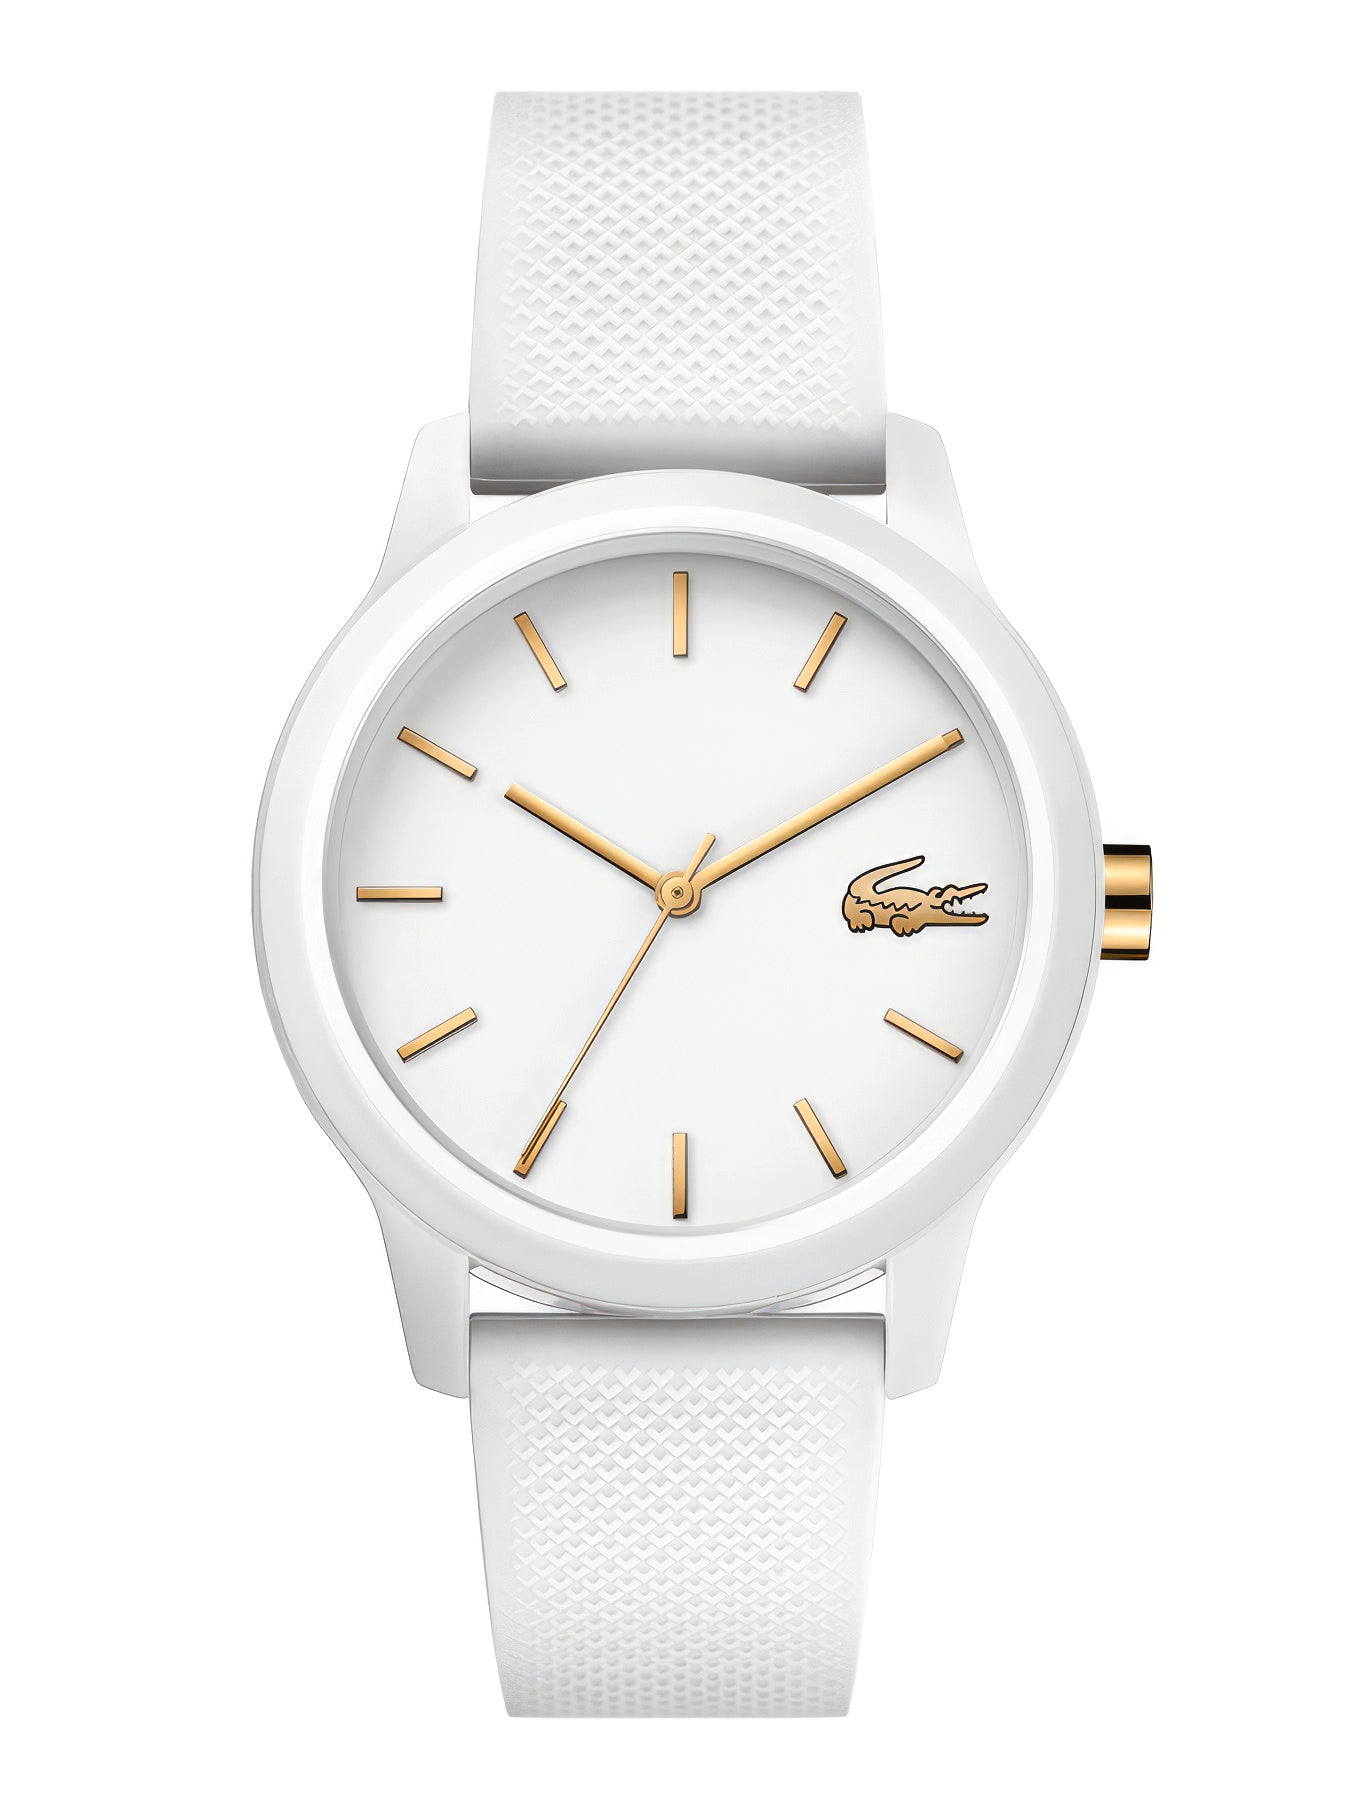 A Ladies Lacoste.12.12 White Watch 2001063 on a white background.